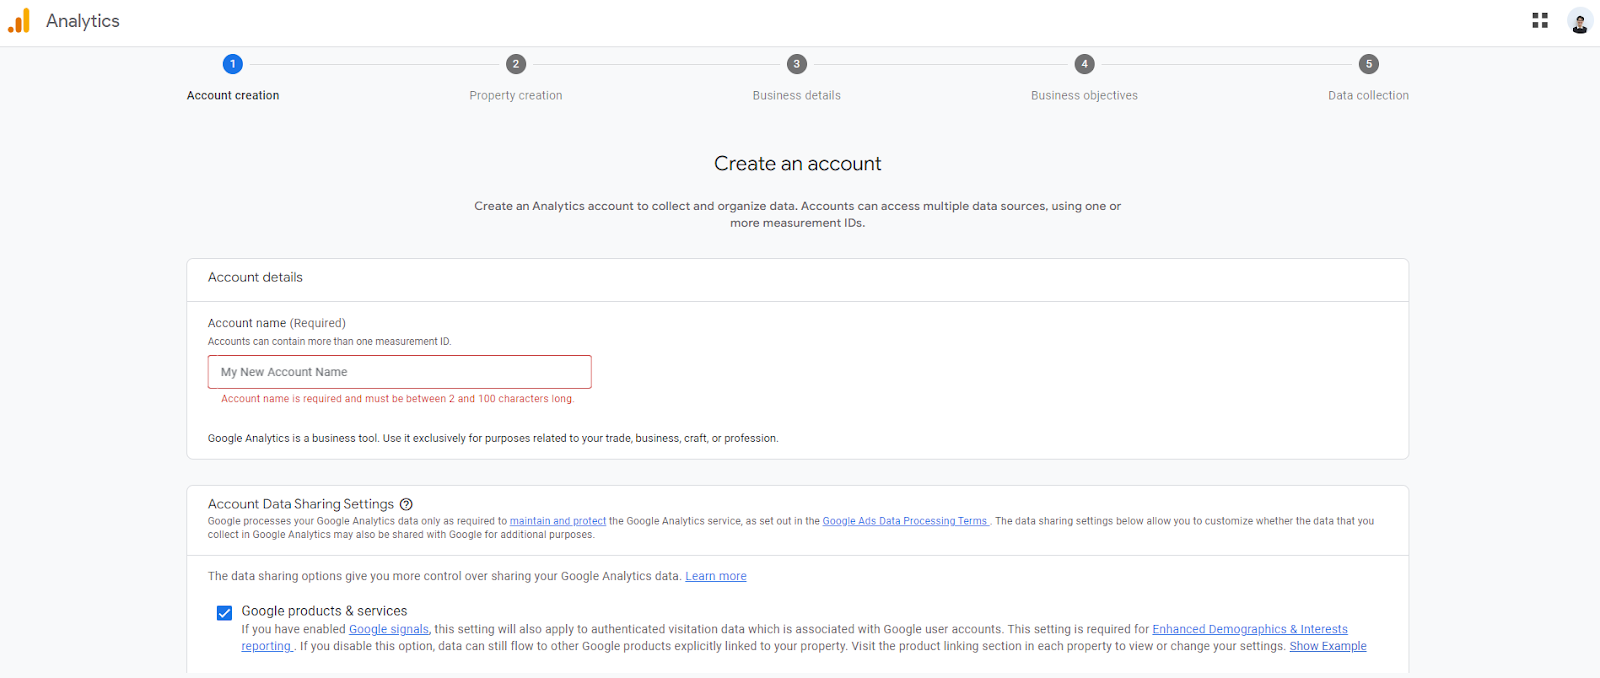 Step 2: Setting Up Your Analytics Account: Fill in your Account Details